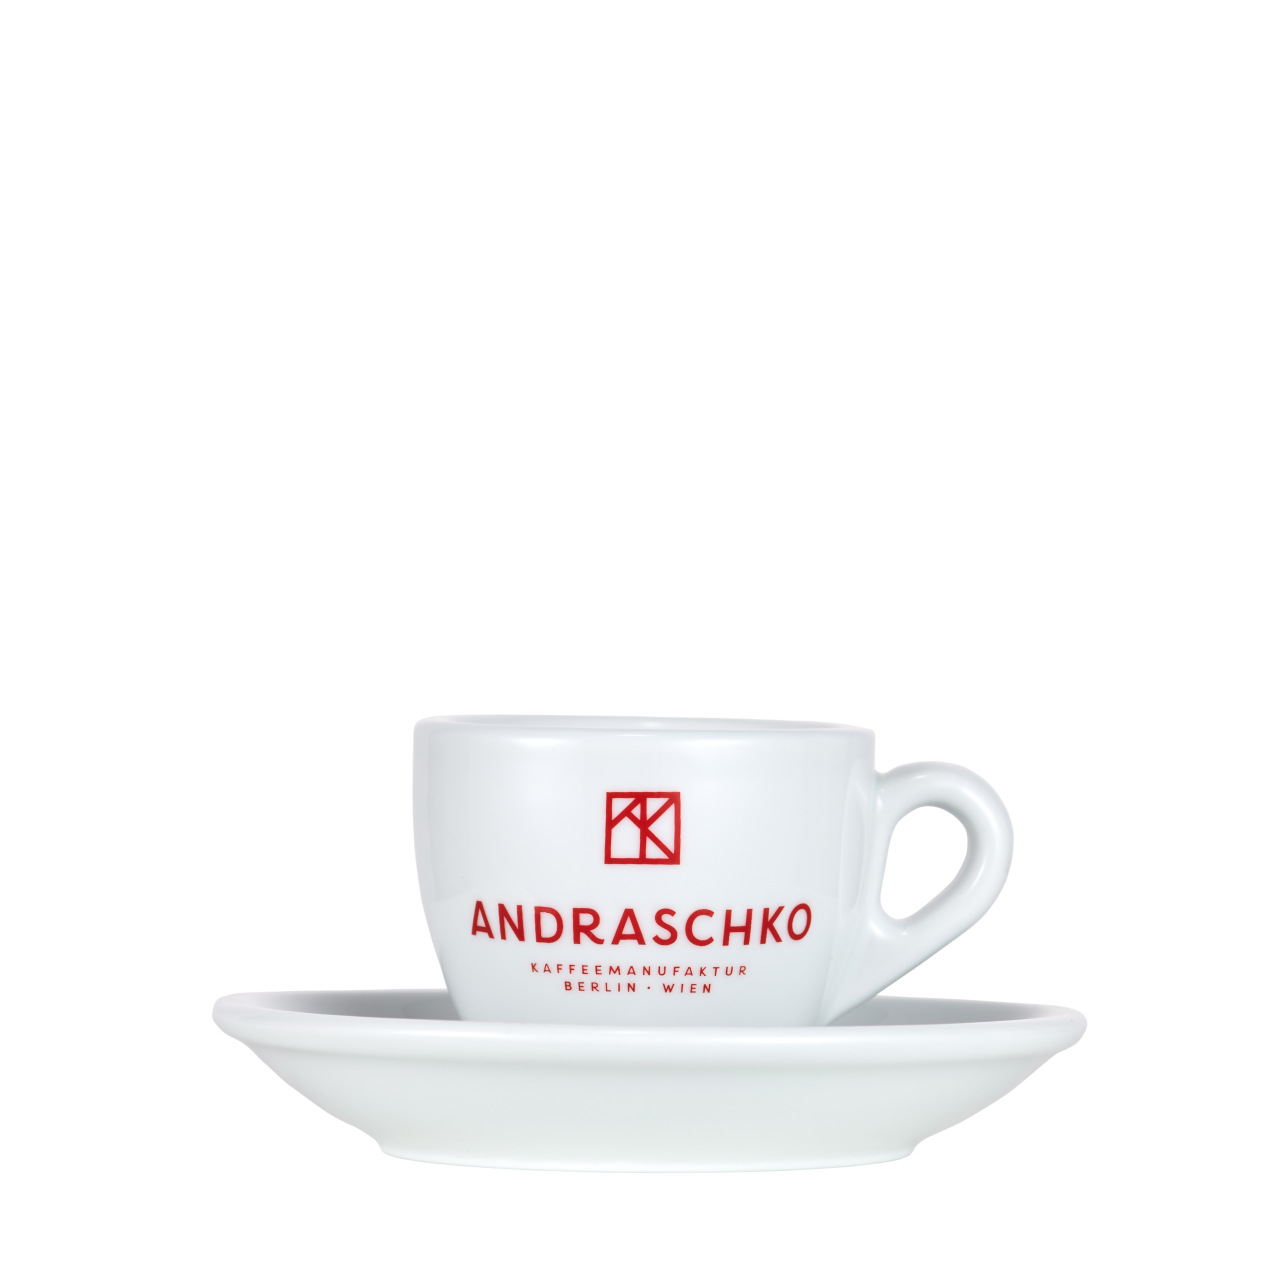 Andraschko Espresso Cup with Saucer